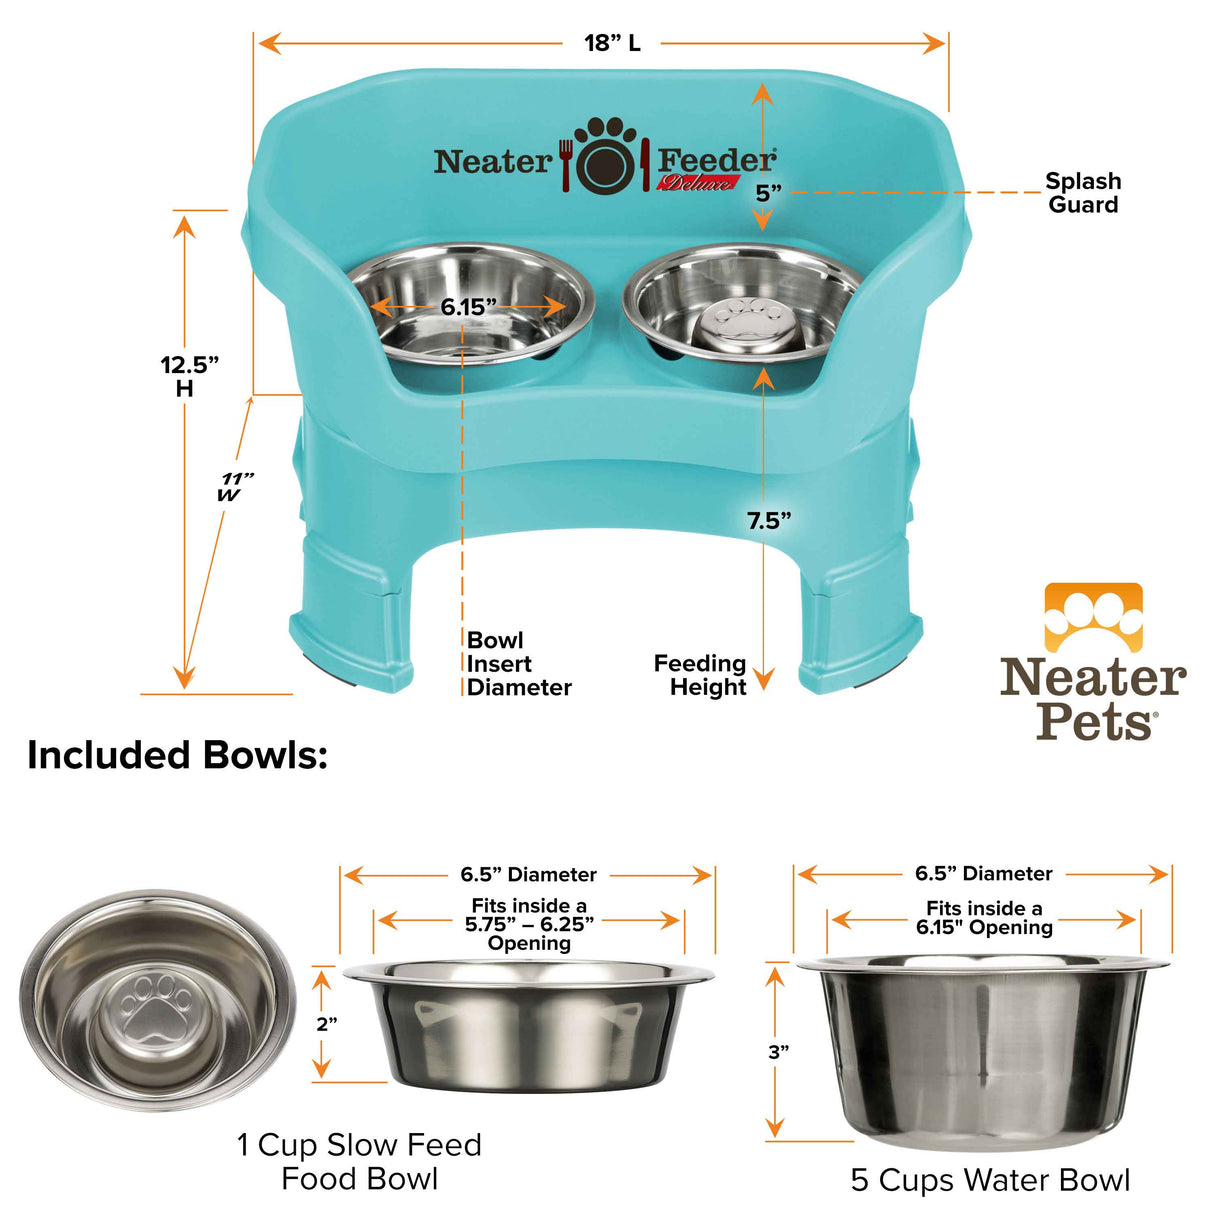 Dimensions of Aquamarine medium DELUXE Neater Feeder with Stainless Steel Slow Feed Bowl with leg extensions